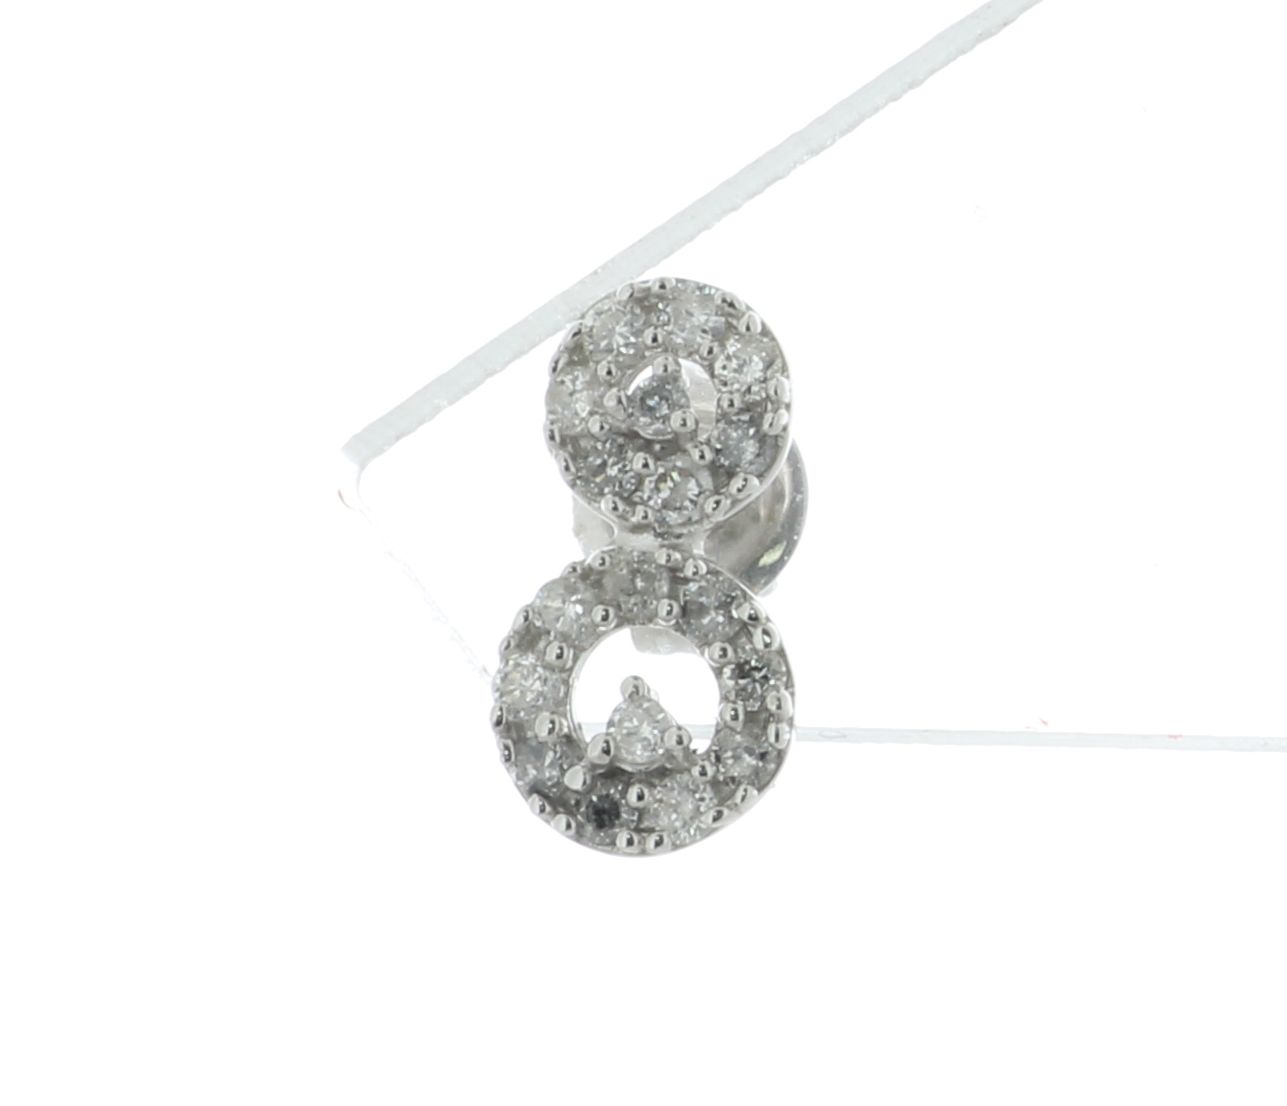 18ct White Gold Round Cluster Claw Set Diamond Earring 0.35 Carats - Image 4 of 6